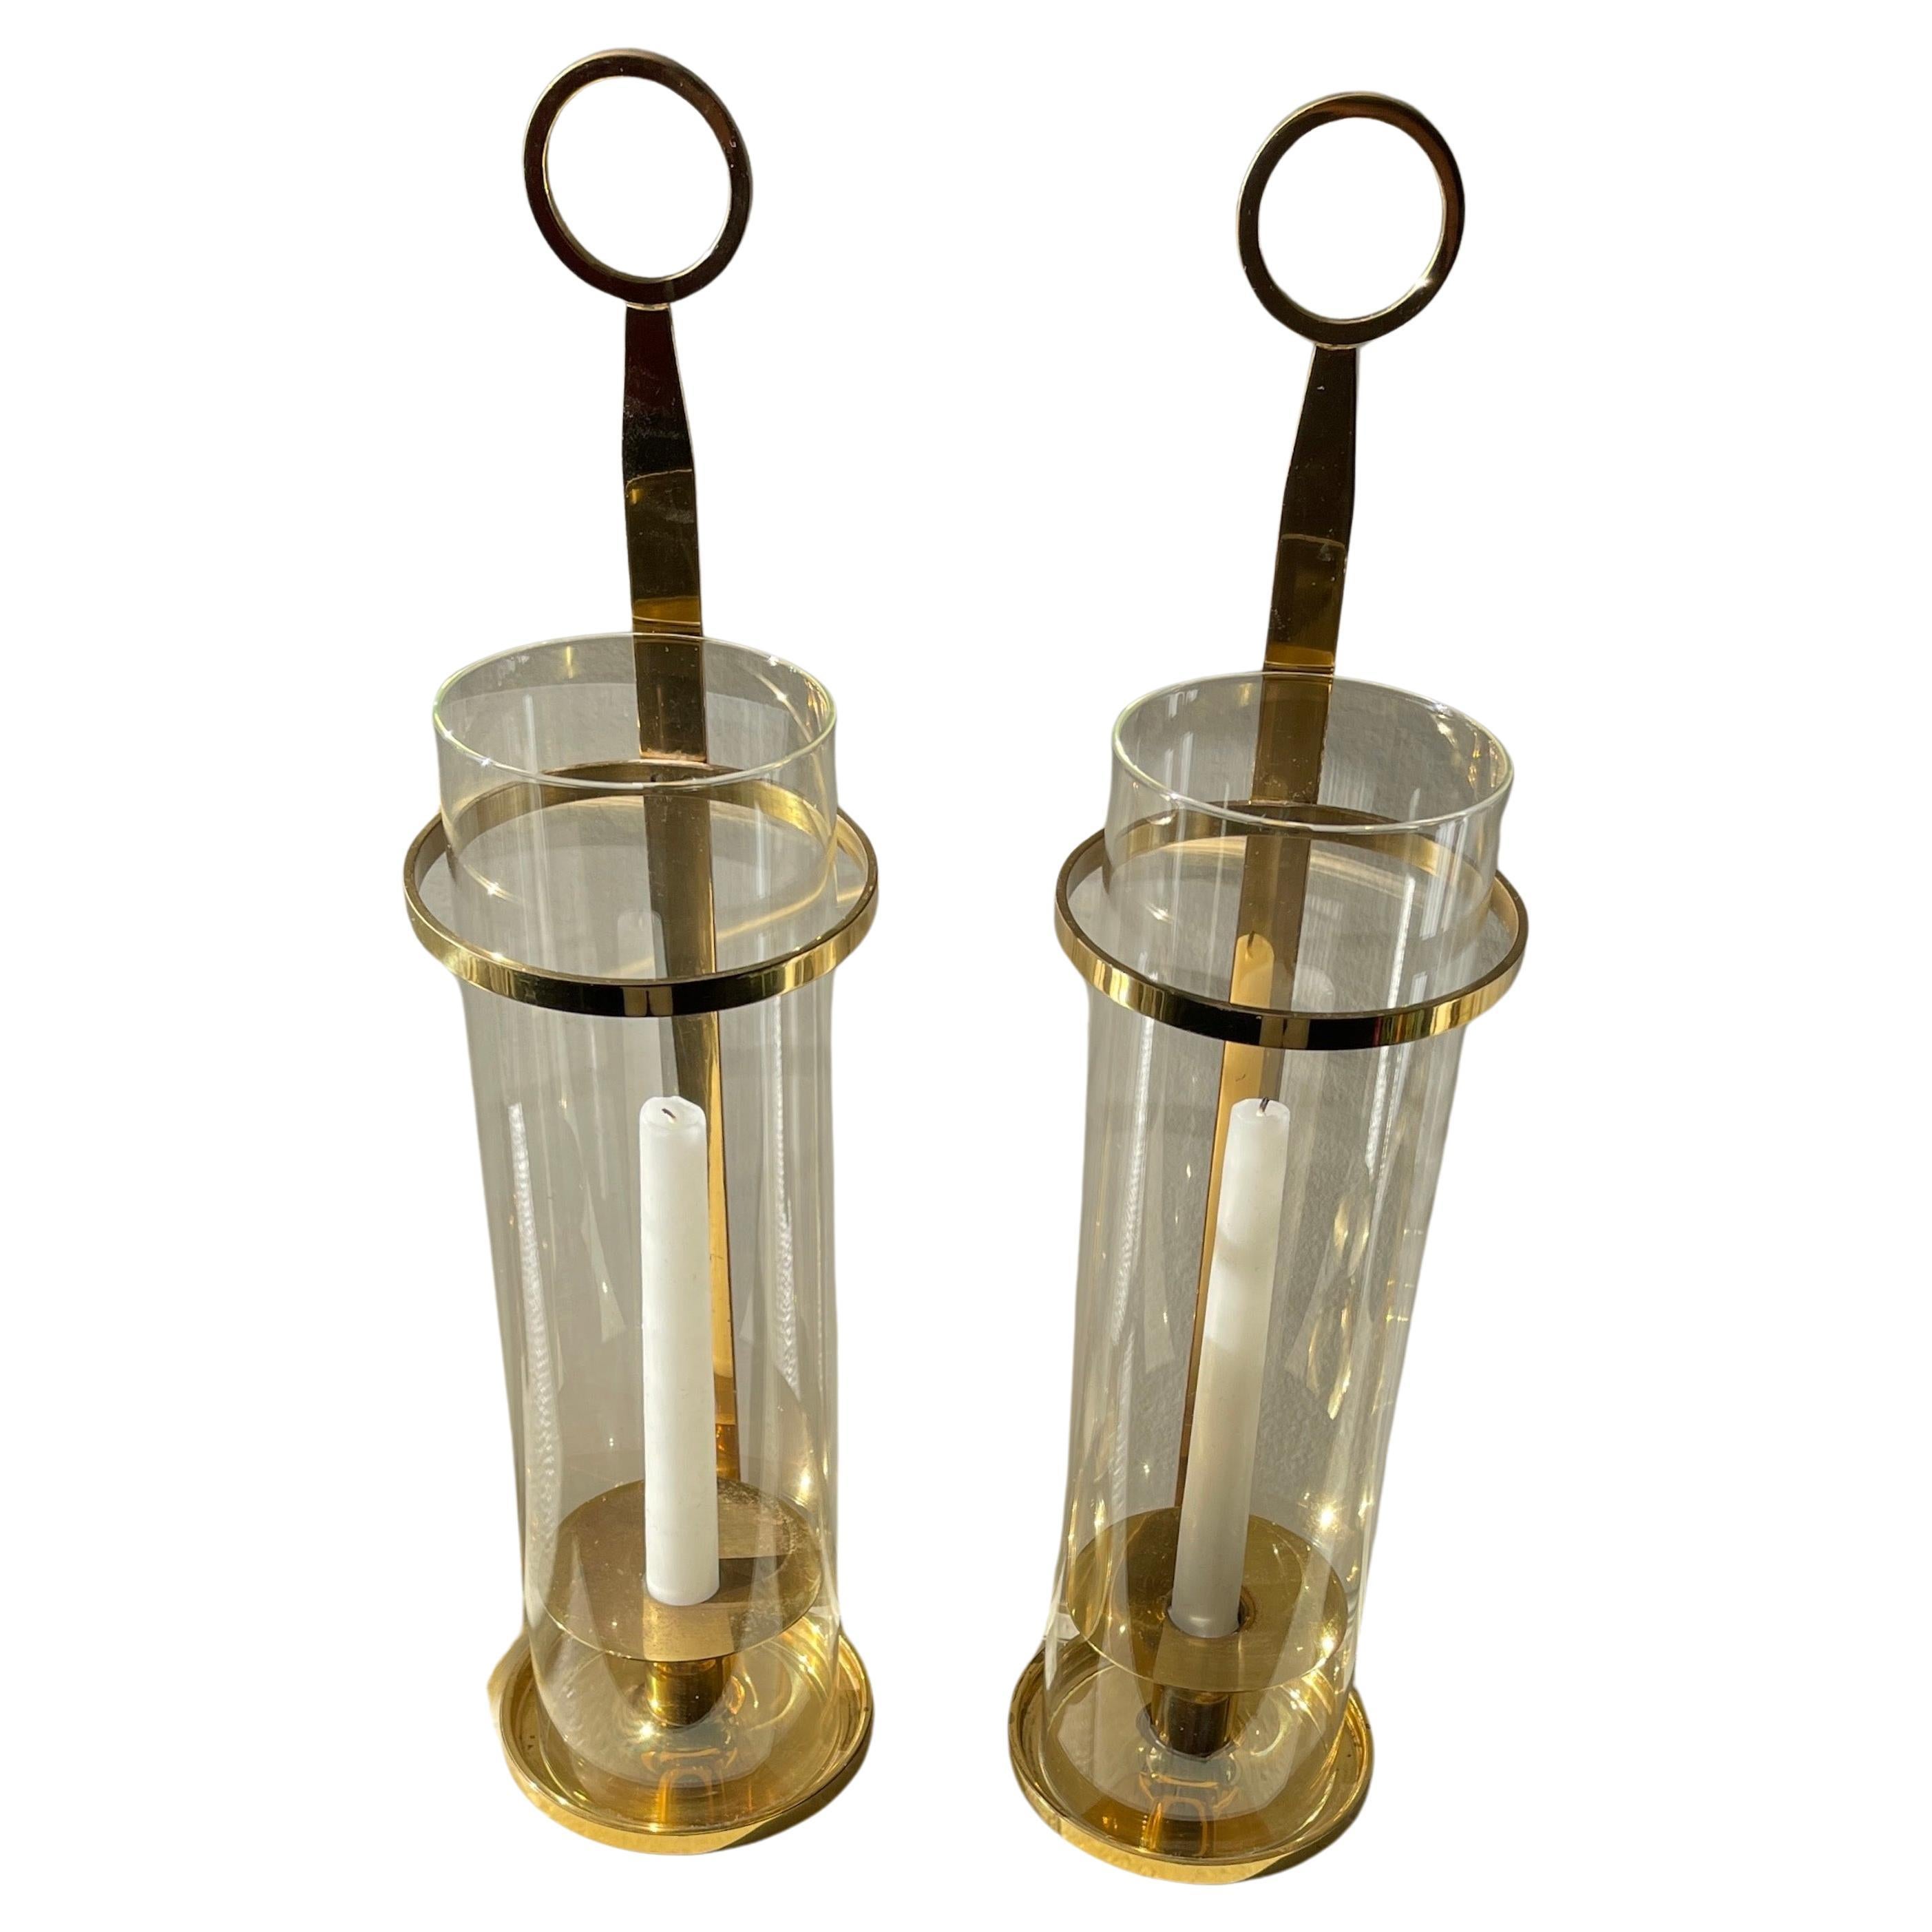 Tommi Parzinger (1901 - 1981)  Pair of Brass and Glass Candle holders. 
Parzinger's works were referred as 